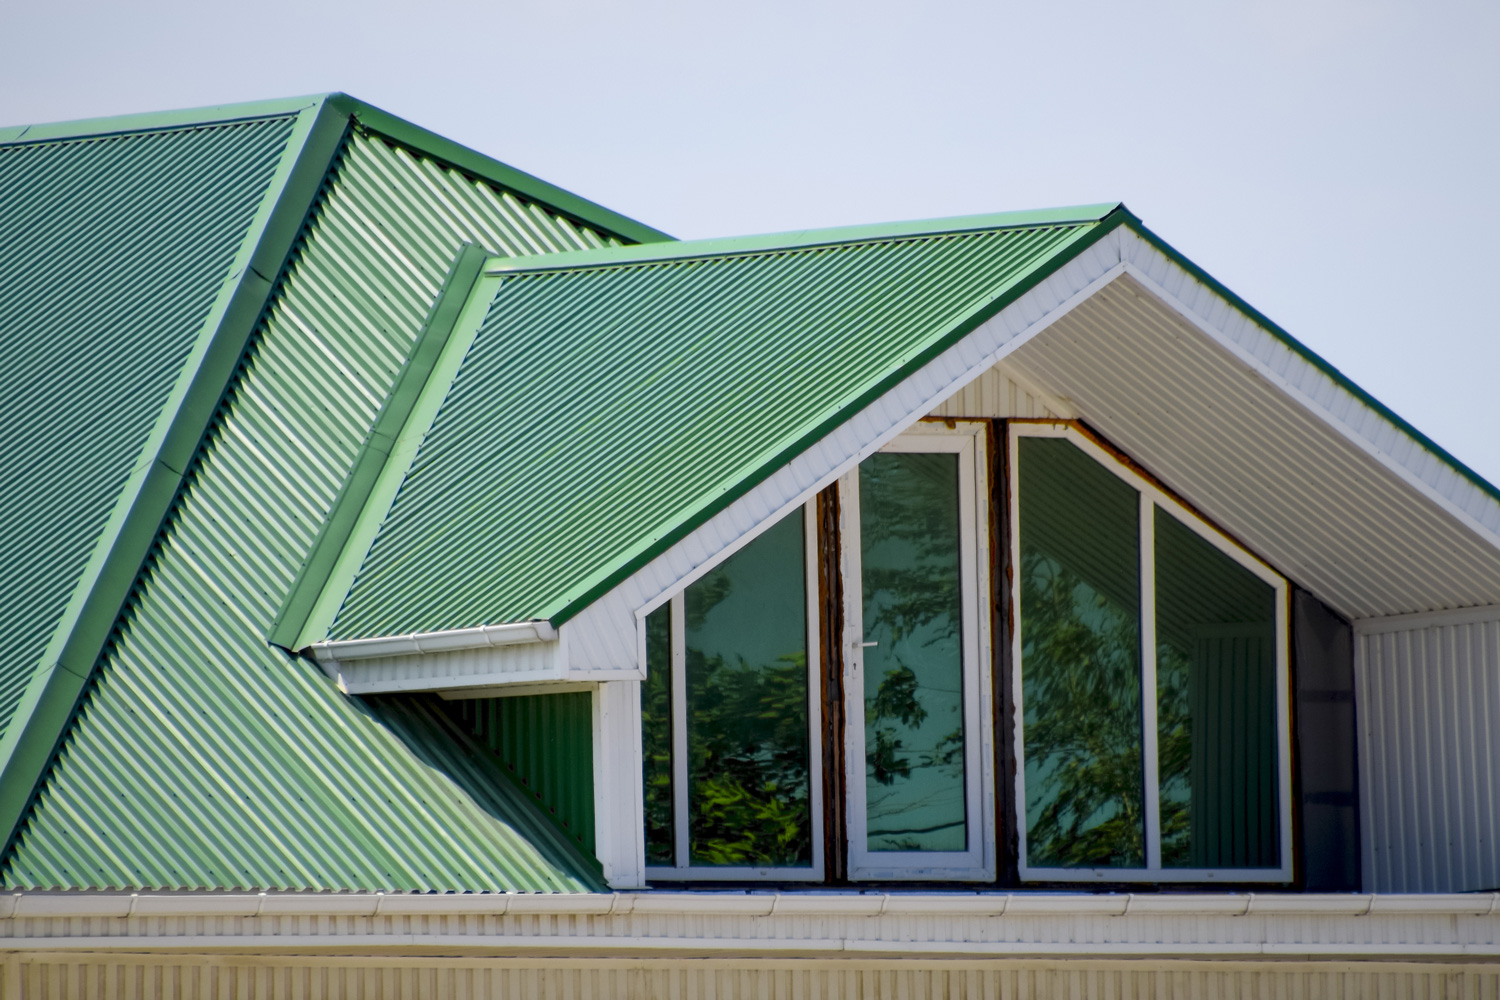 The house with plastic windows and a green roof of corrugated sheet. Roofing of metal profile wavy shape on the house with plastic windows. Green roof of corrugated metal profile and plastic windows.